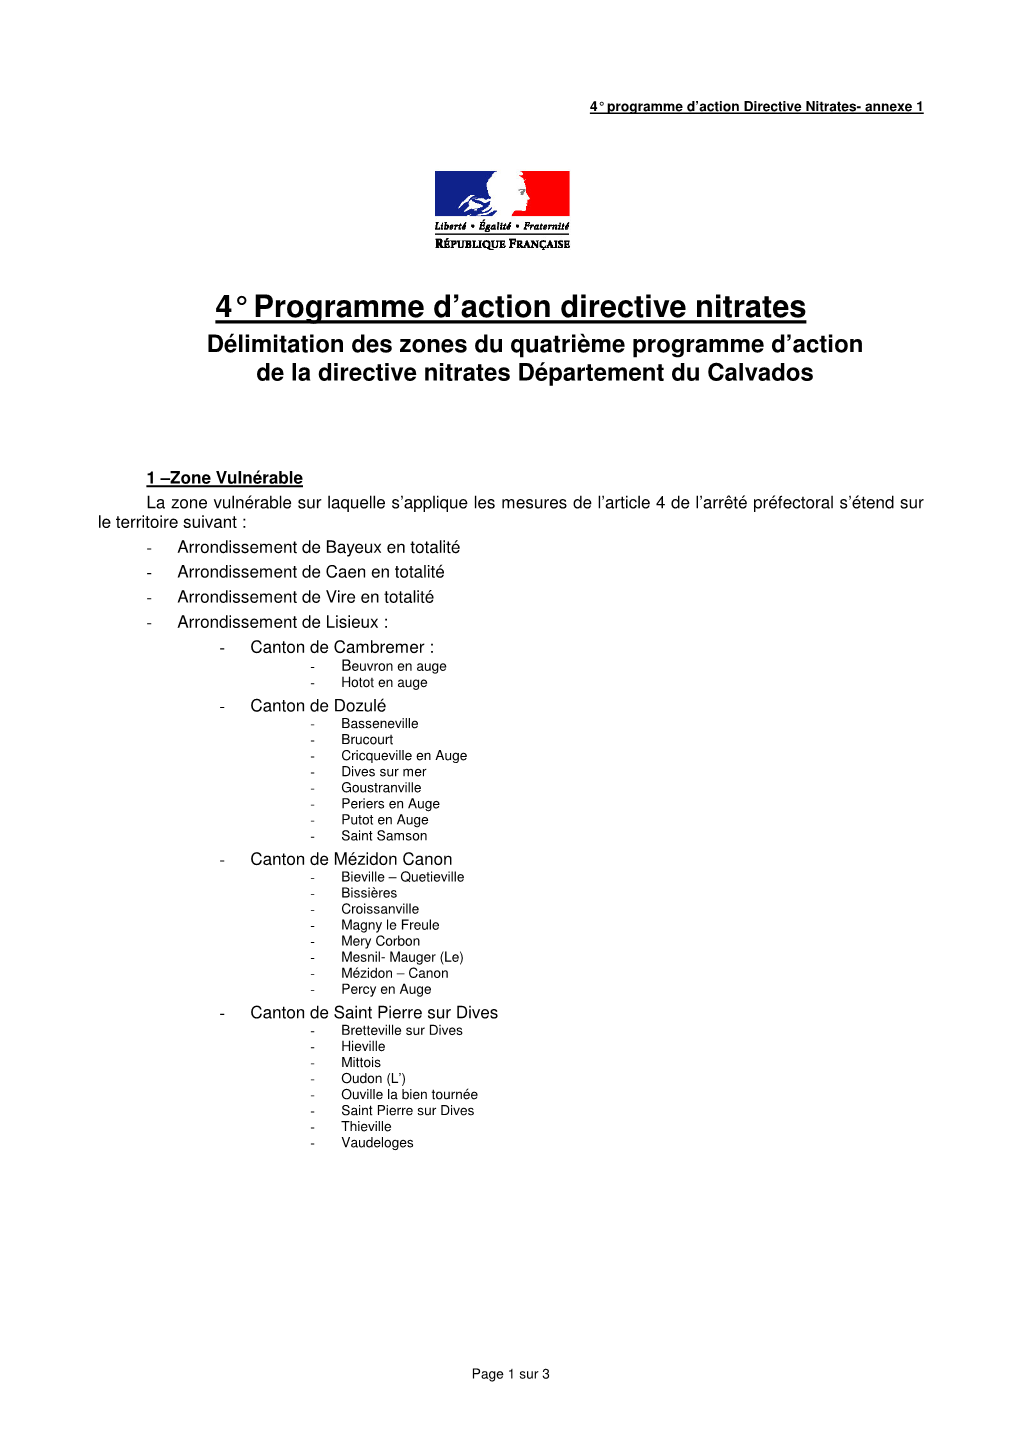 4° Programme D'action Directive Nitrates